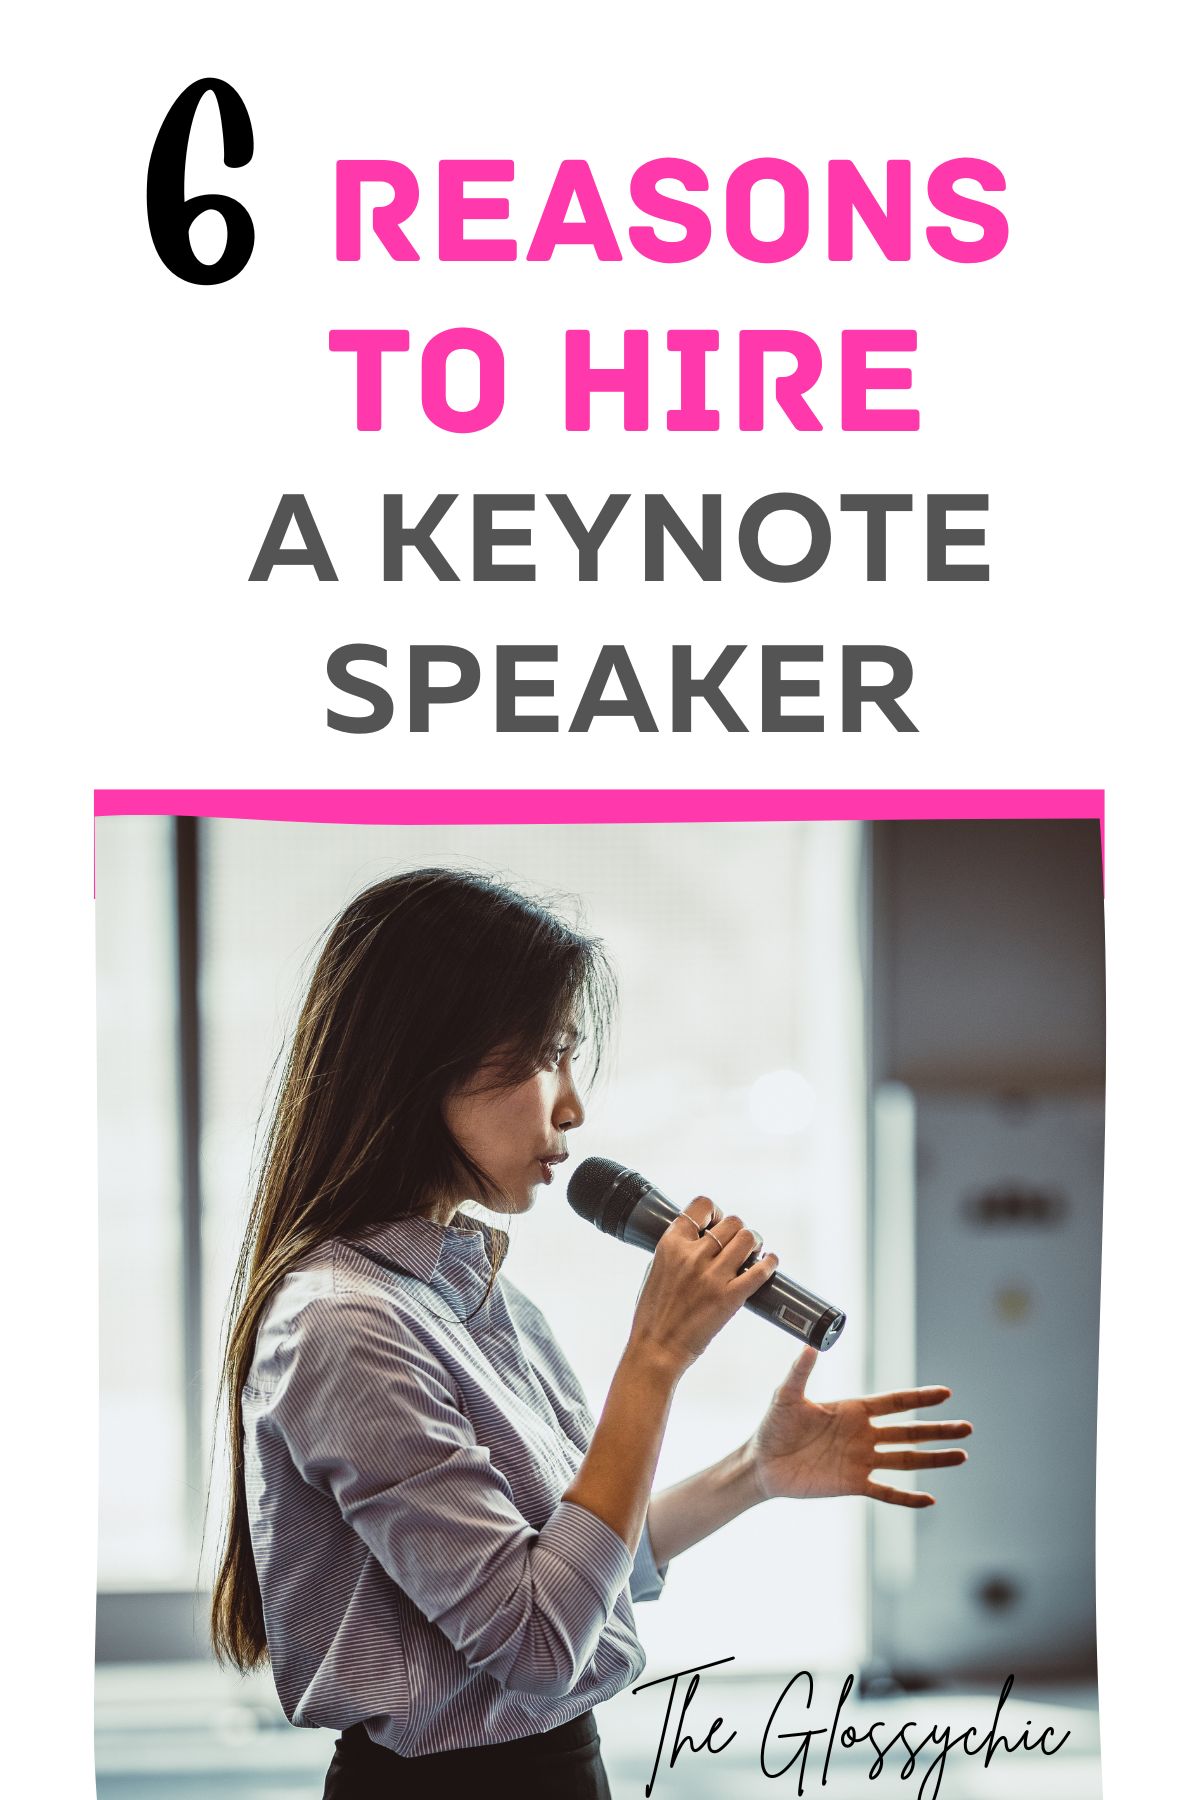 Impact Of Hiring Keynote Speaker For Corporate Events